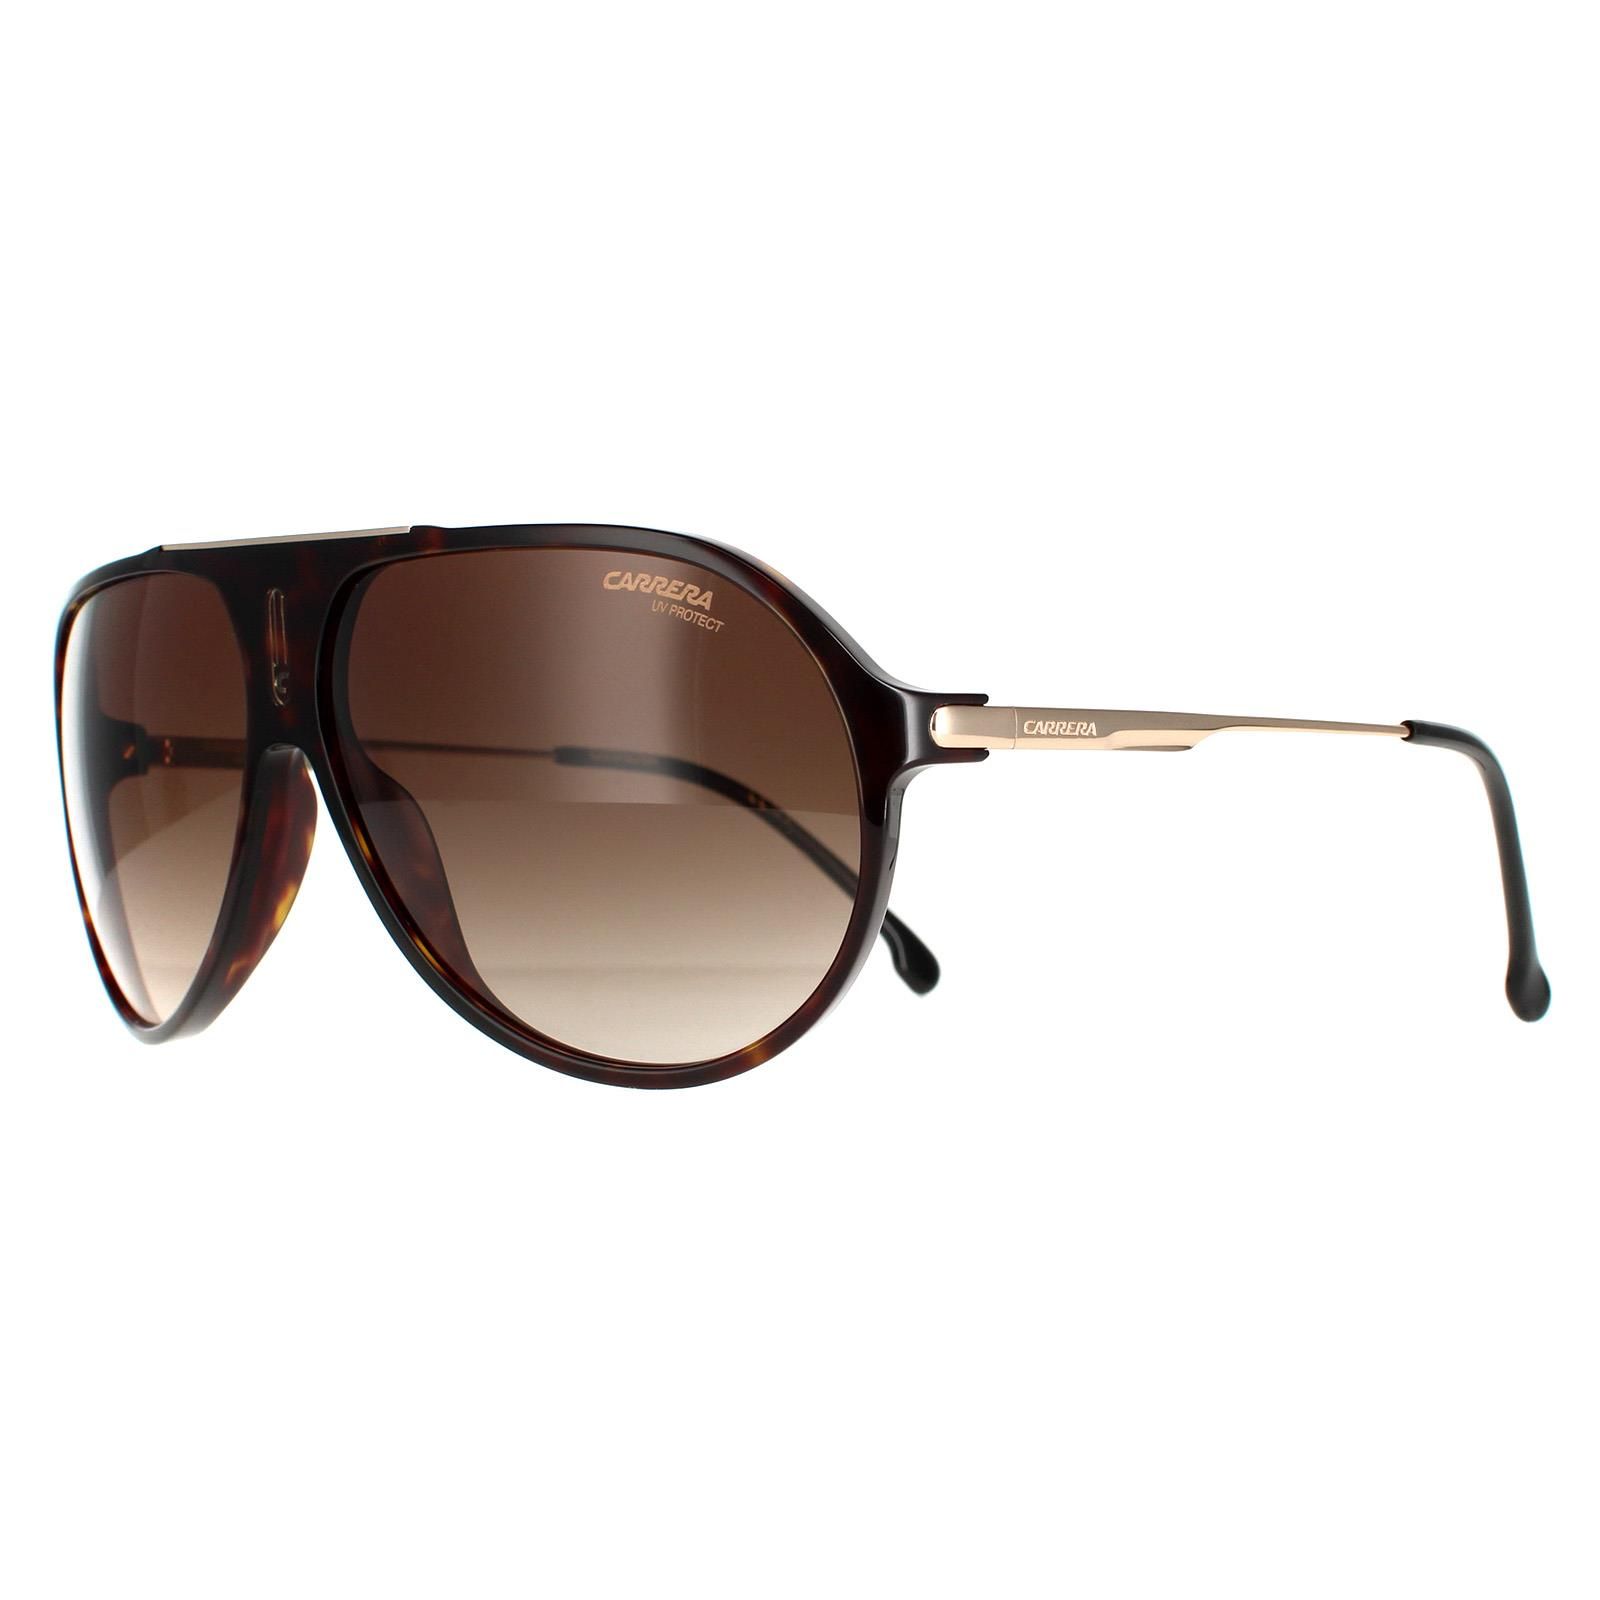 Carrera Aviator Mens Dark Havana Brown Gradient Hot65  Carrera are a reinterpretation of one of Carrera's bestselling designs and has been specifically created to celebrate Carrera's 65th anniversary. The full rim design has large teardrop shaped lenses and a lightweight plastic frame front featuring the Carrera C on the bridge. Finished with a sleek metal trim and temples with the Carrera text logo engraved.